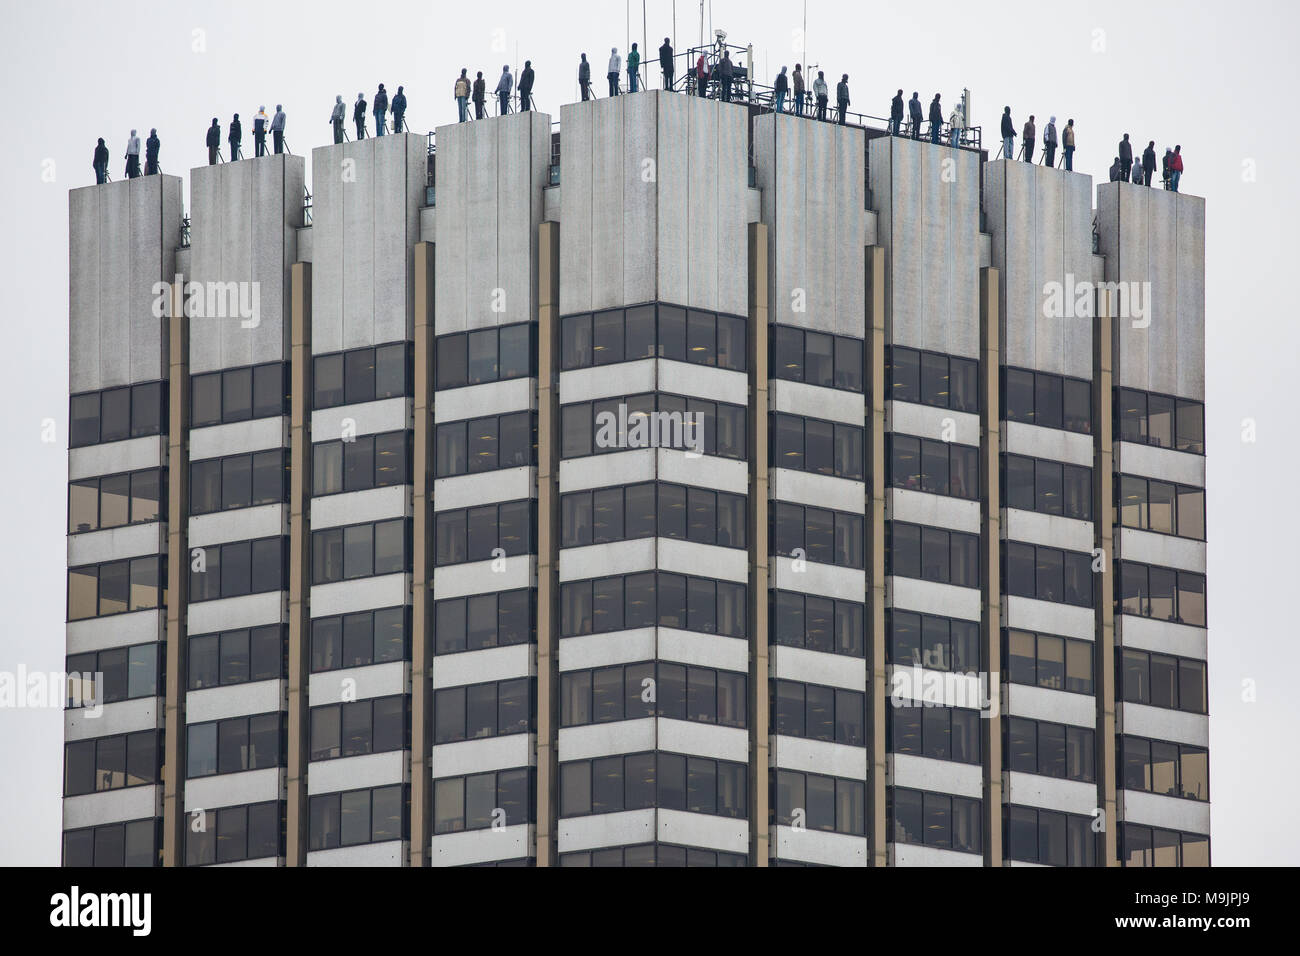 London, UK. 27th March, 2018. 84 life-sized sculptures by Mark Jenkins have been positioned on the top of the ITV Television Centre building as part of Project 84 by the charity CALM (Campaign Against Living Miserably) to represent the 84 men who take their own lives in the UK every week and so to raise awareness of male suicide. Male suicide is the single biggest killer of men under the age of 45 in the UK. Credit: Mark Kerrison/Alamy Live News Stock Photo